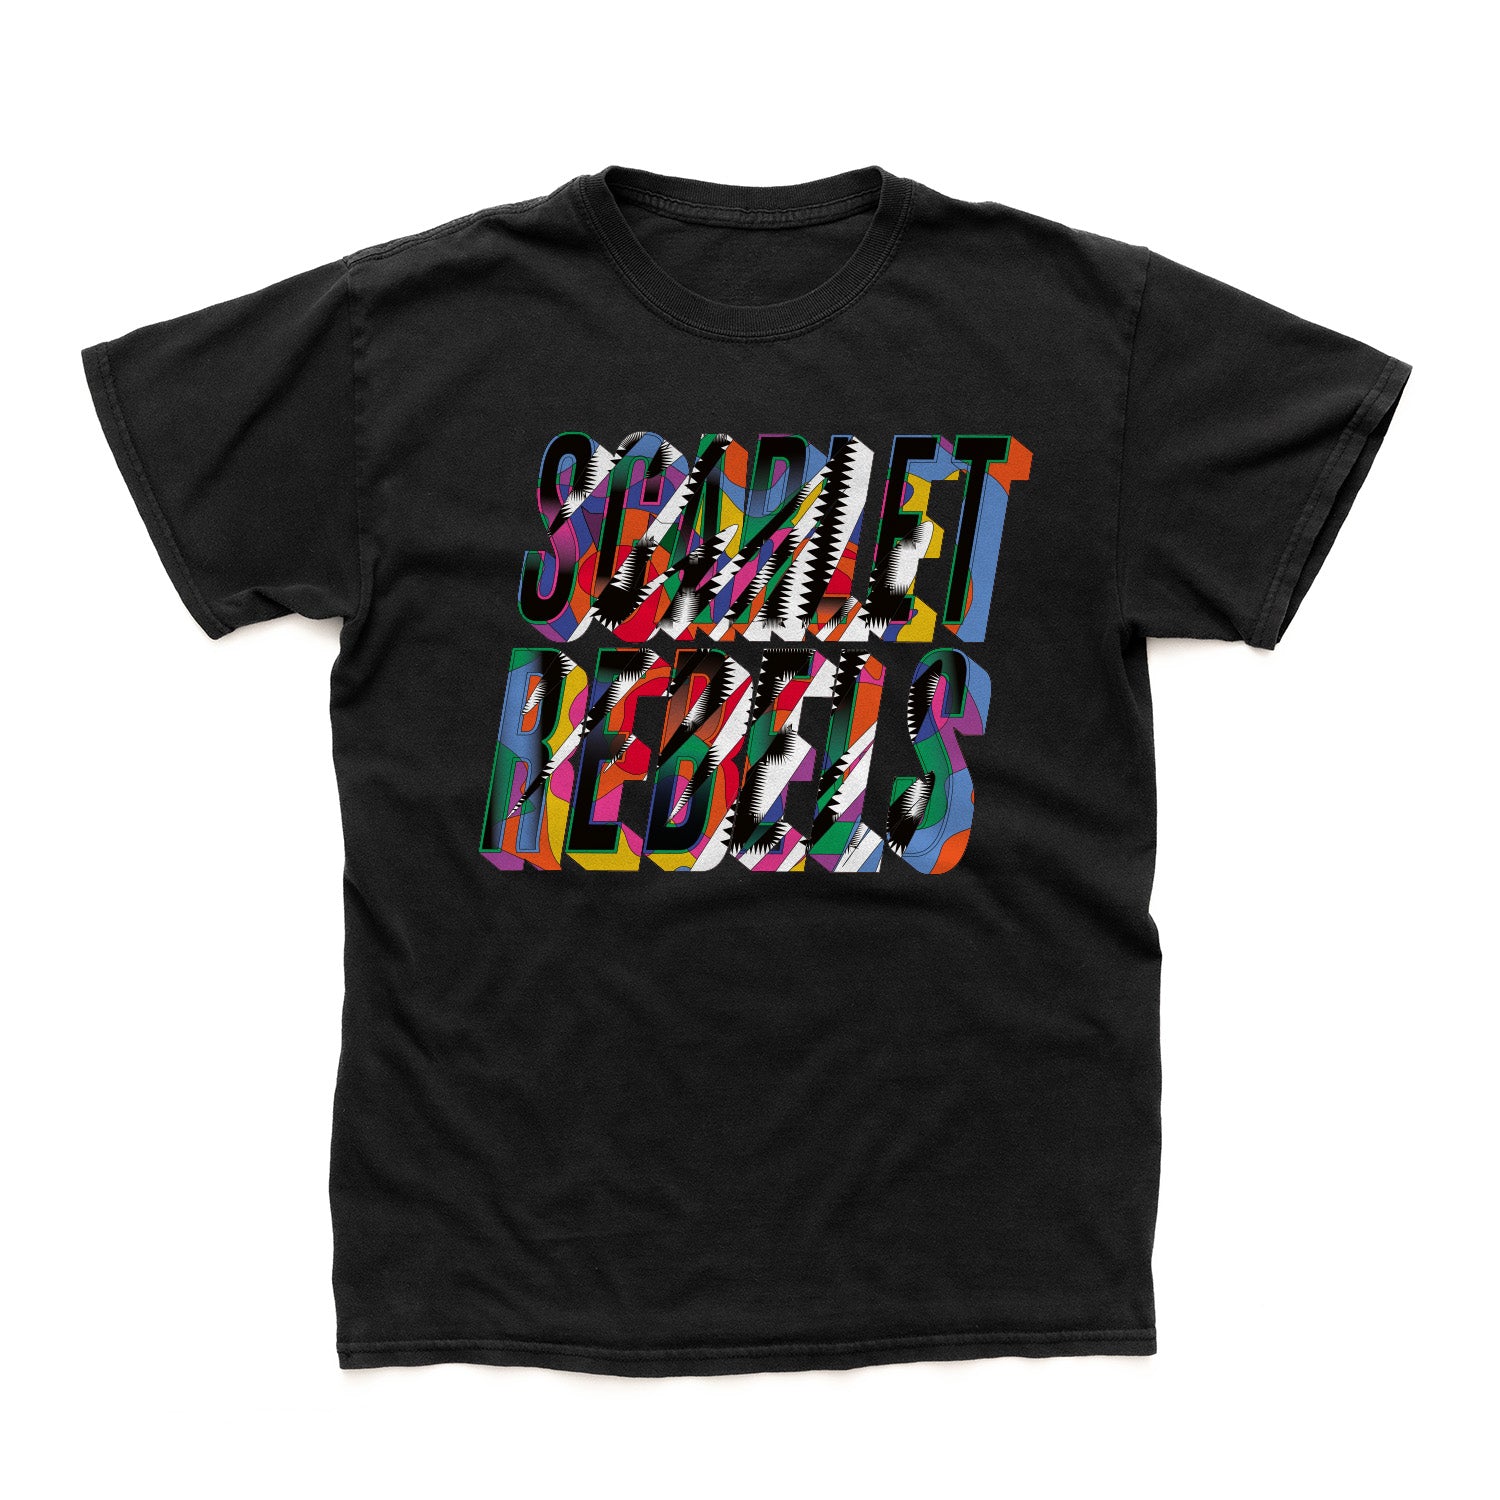 Scarlet Rebels "Where The Colours Meet" T shirt - PRE-ORDER